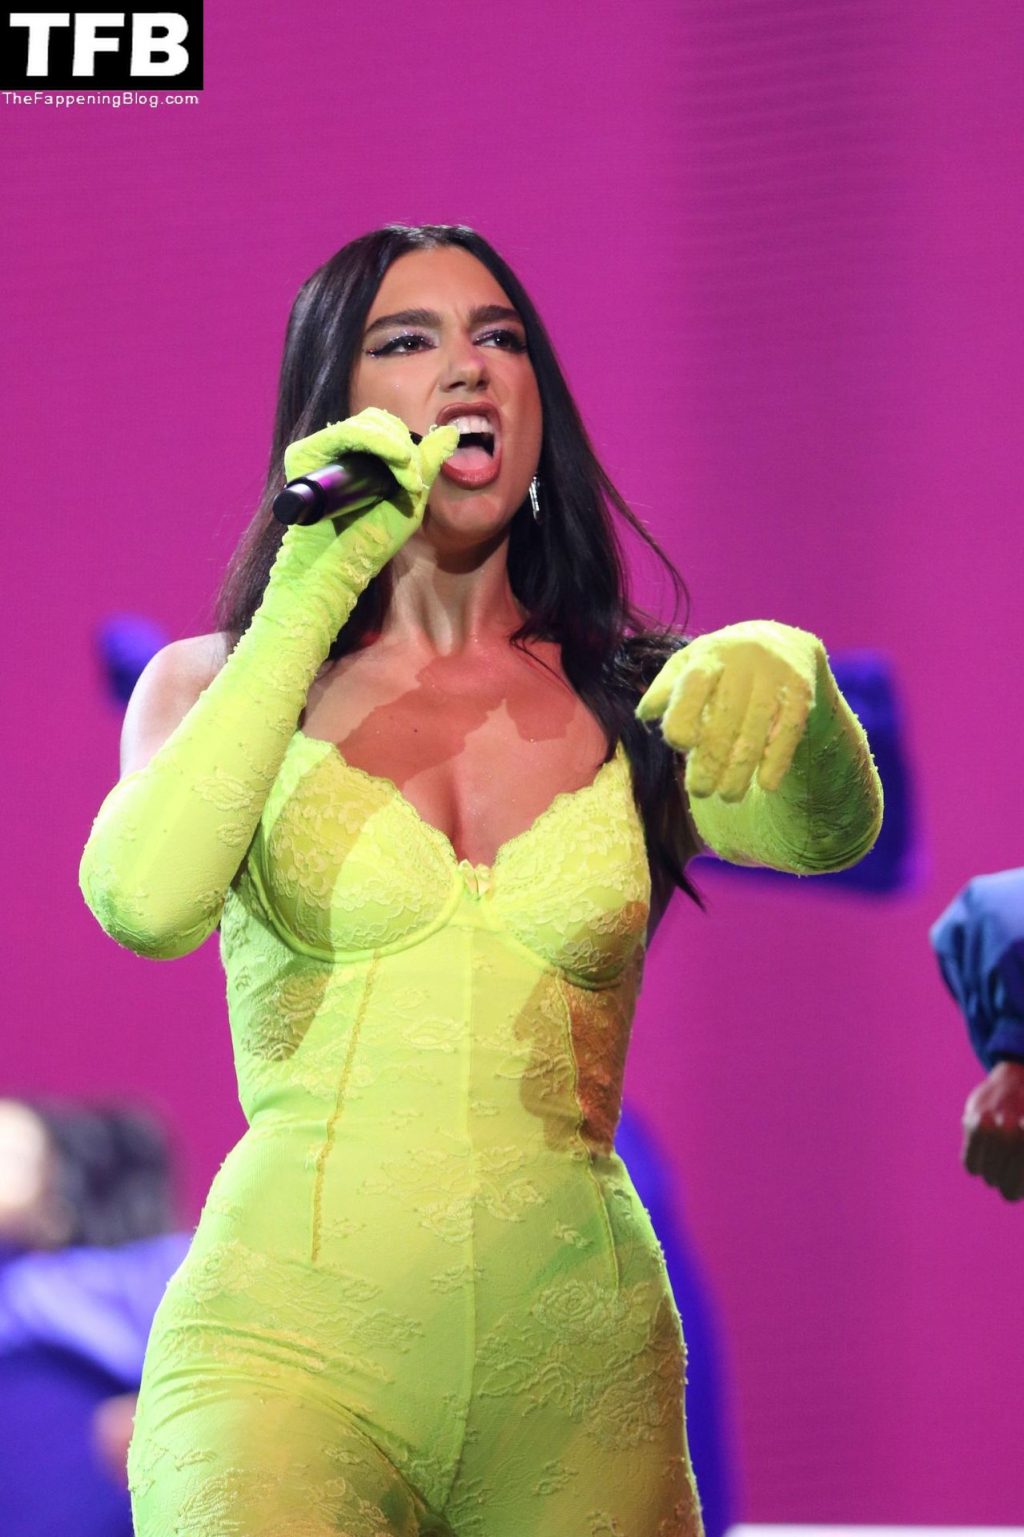 Dua Lipa Sexy The Fappening Blog 5 2 1024x1537 - Dua Lipa Shows Off Her Sexy Body on Stage as She Performs During the Future Nostalgia Tour (97 Photos)